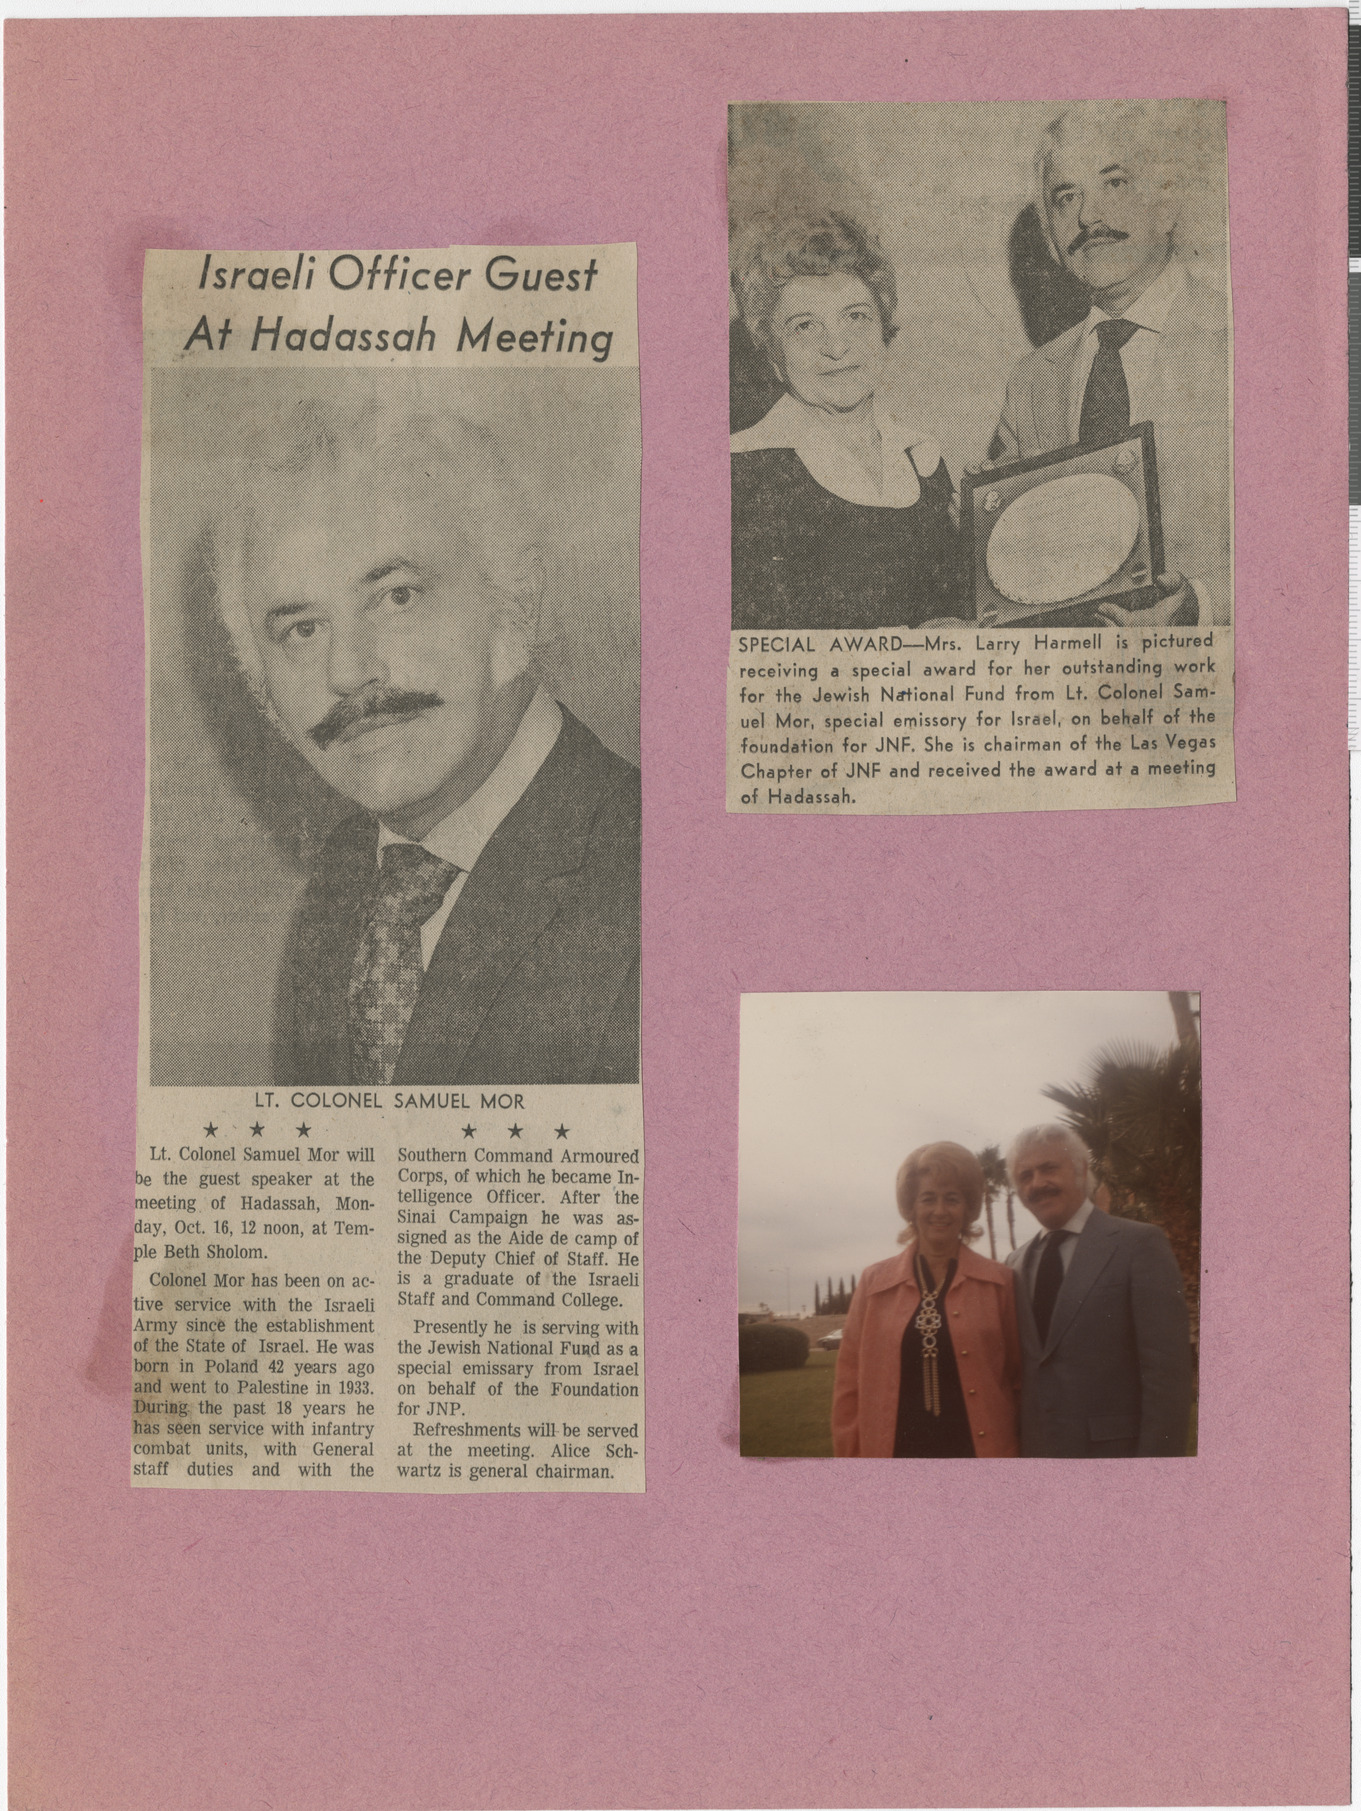 Newspaper clippings, Israeli Officer Guest at Hadassah Meeting, publication and date unknown, and Special Award, with Mrs. Larry Harmell and Lt. Colonel Samuel Mor, publication and date unknown